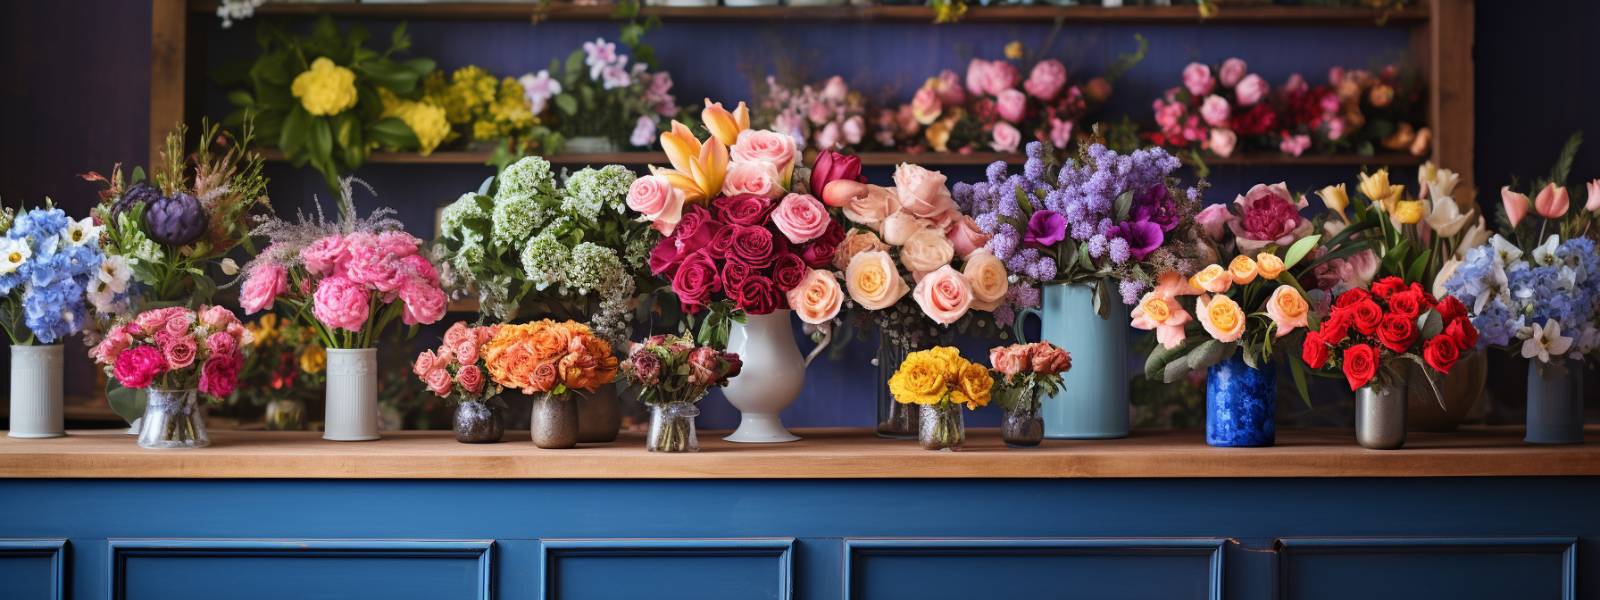 Colourful flower arrangements in various containers filled with colourful and vibrant blooms - Fabulous Flowers